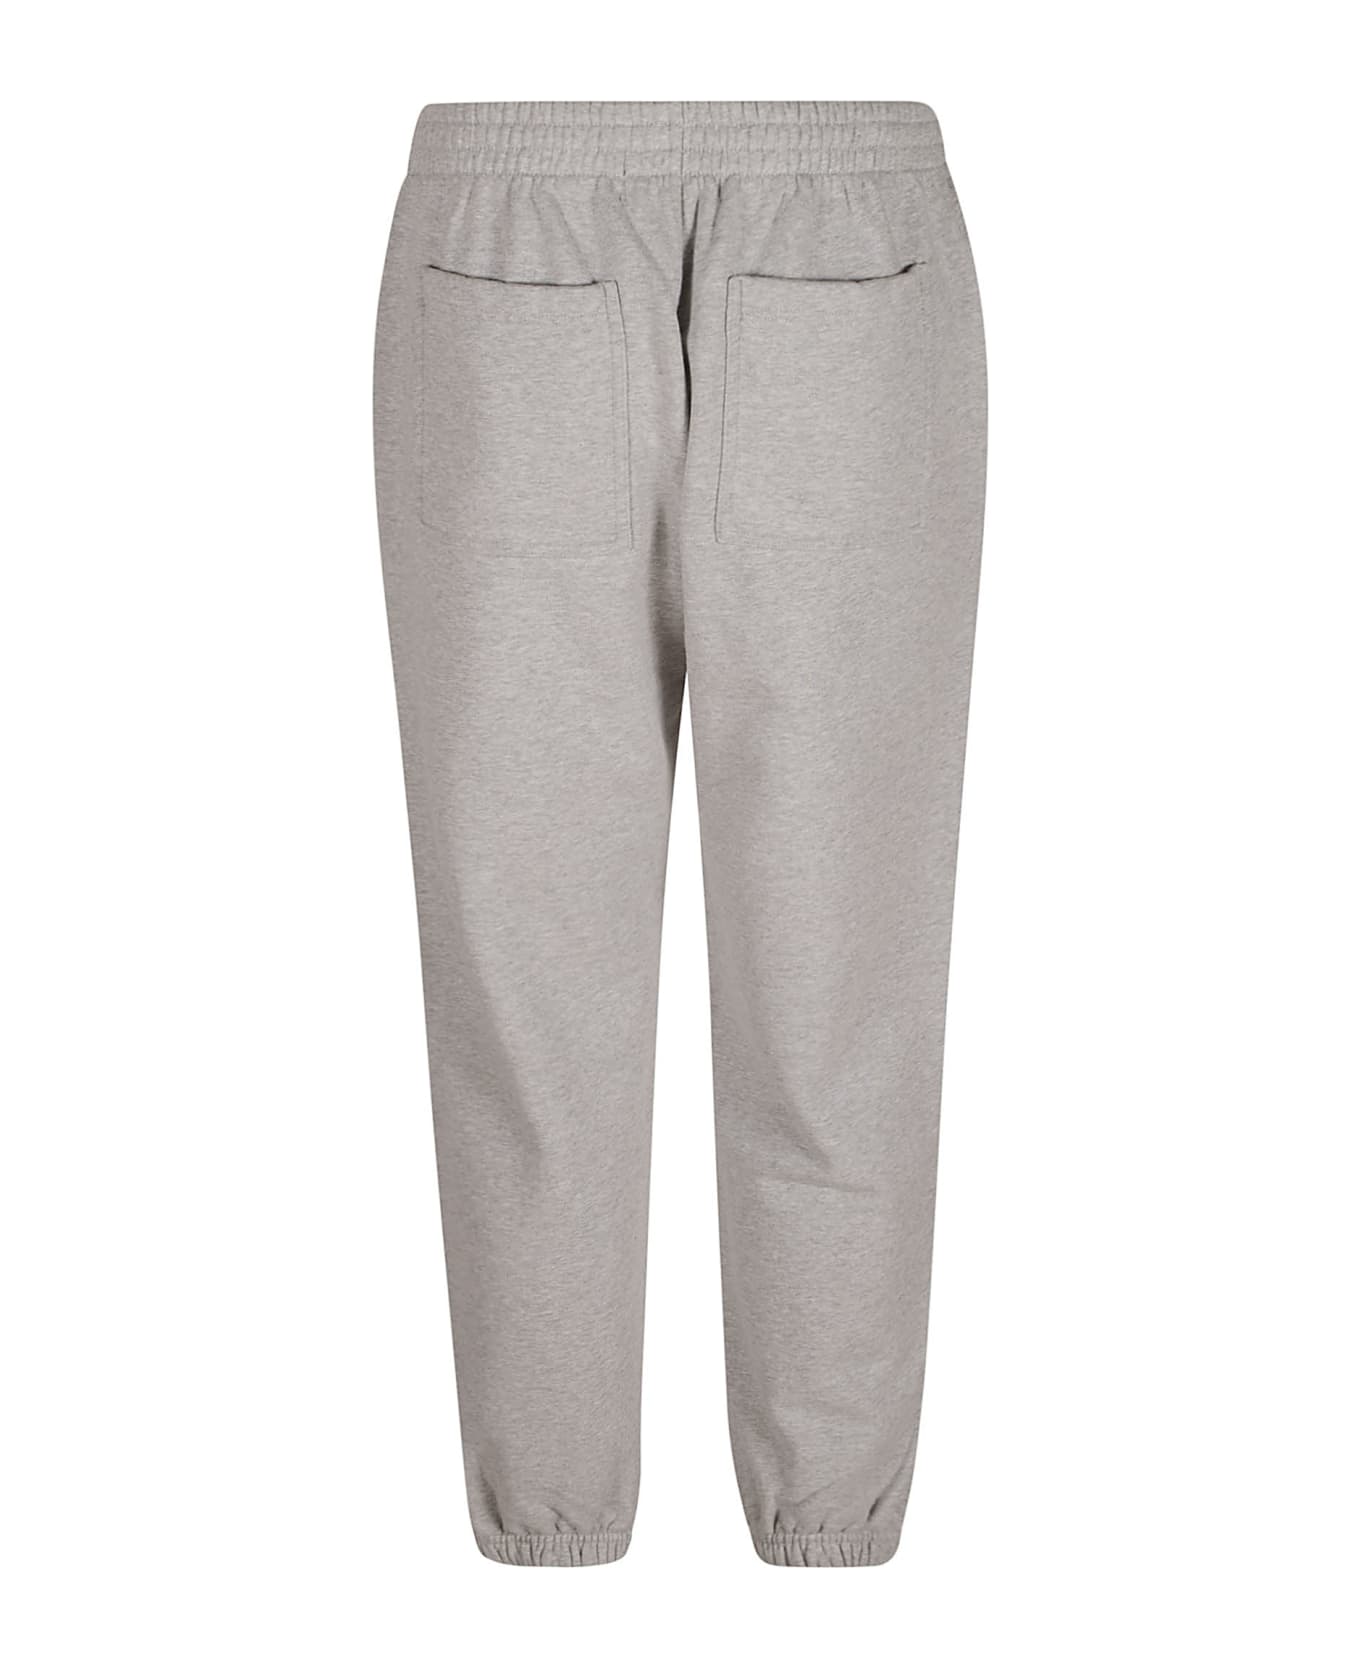 REPRESENT Owners Club Trousers - Ashgrey Black